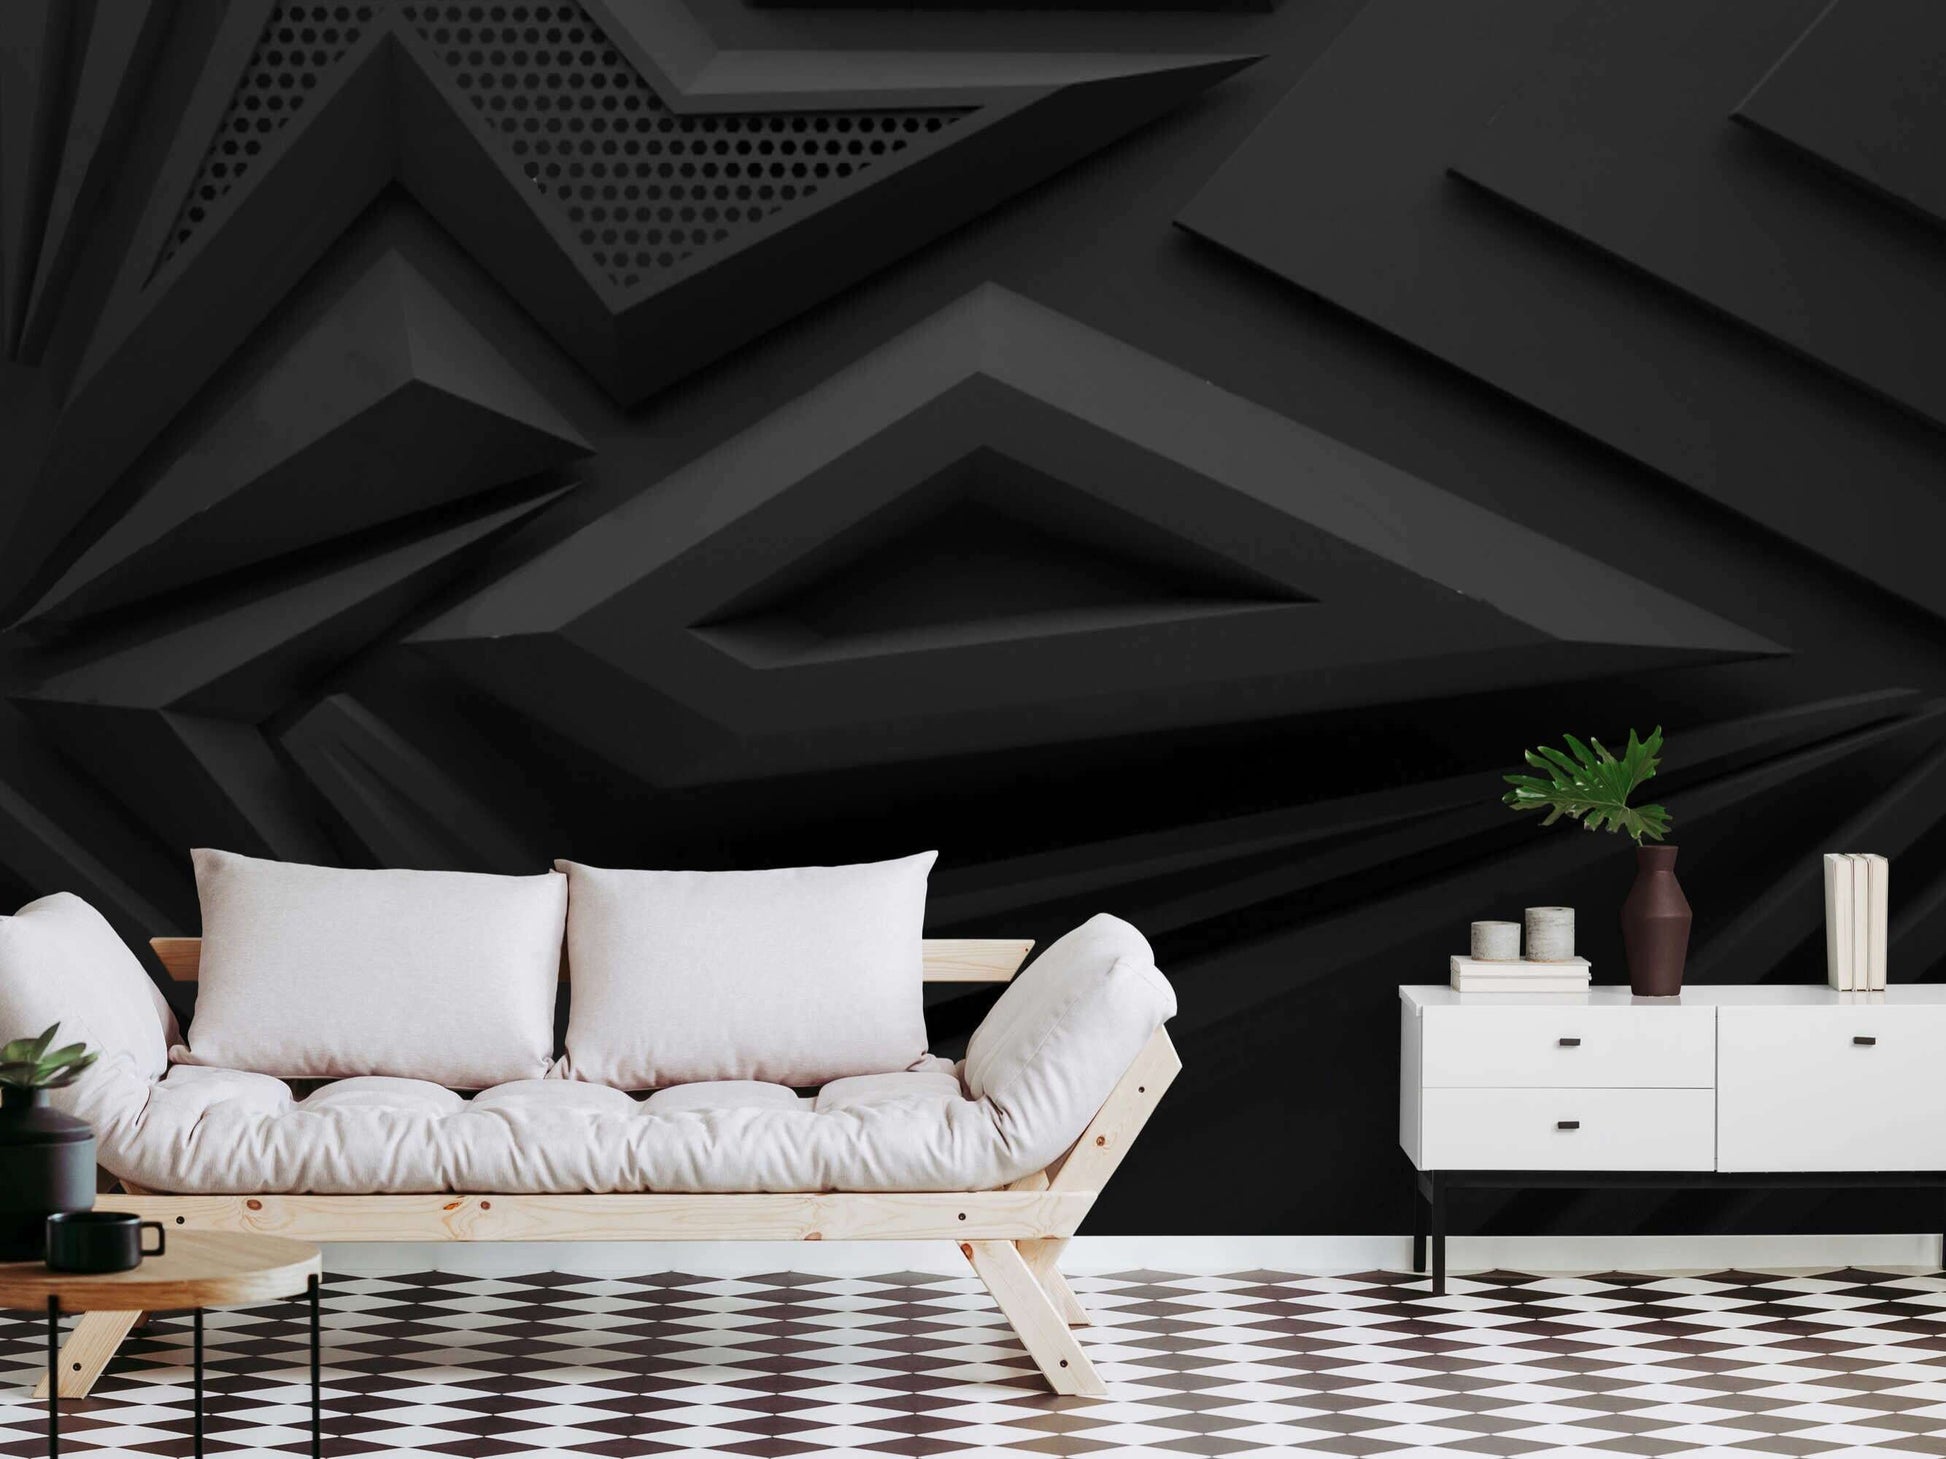 Immersive 3D wallpaper with a dark mural design, adding depth and dimension to the room.